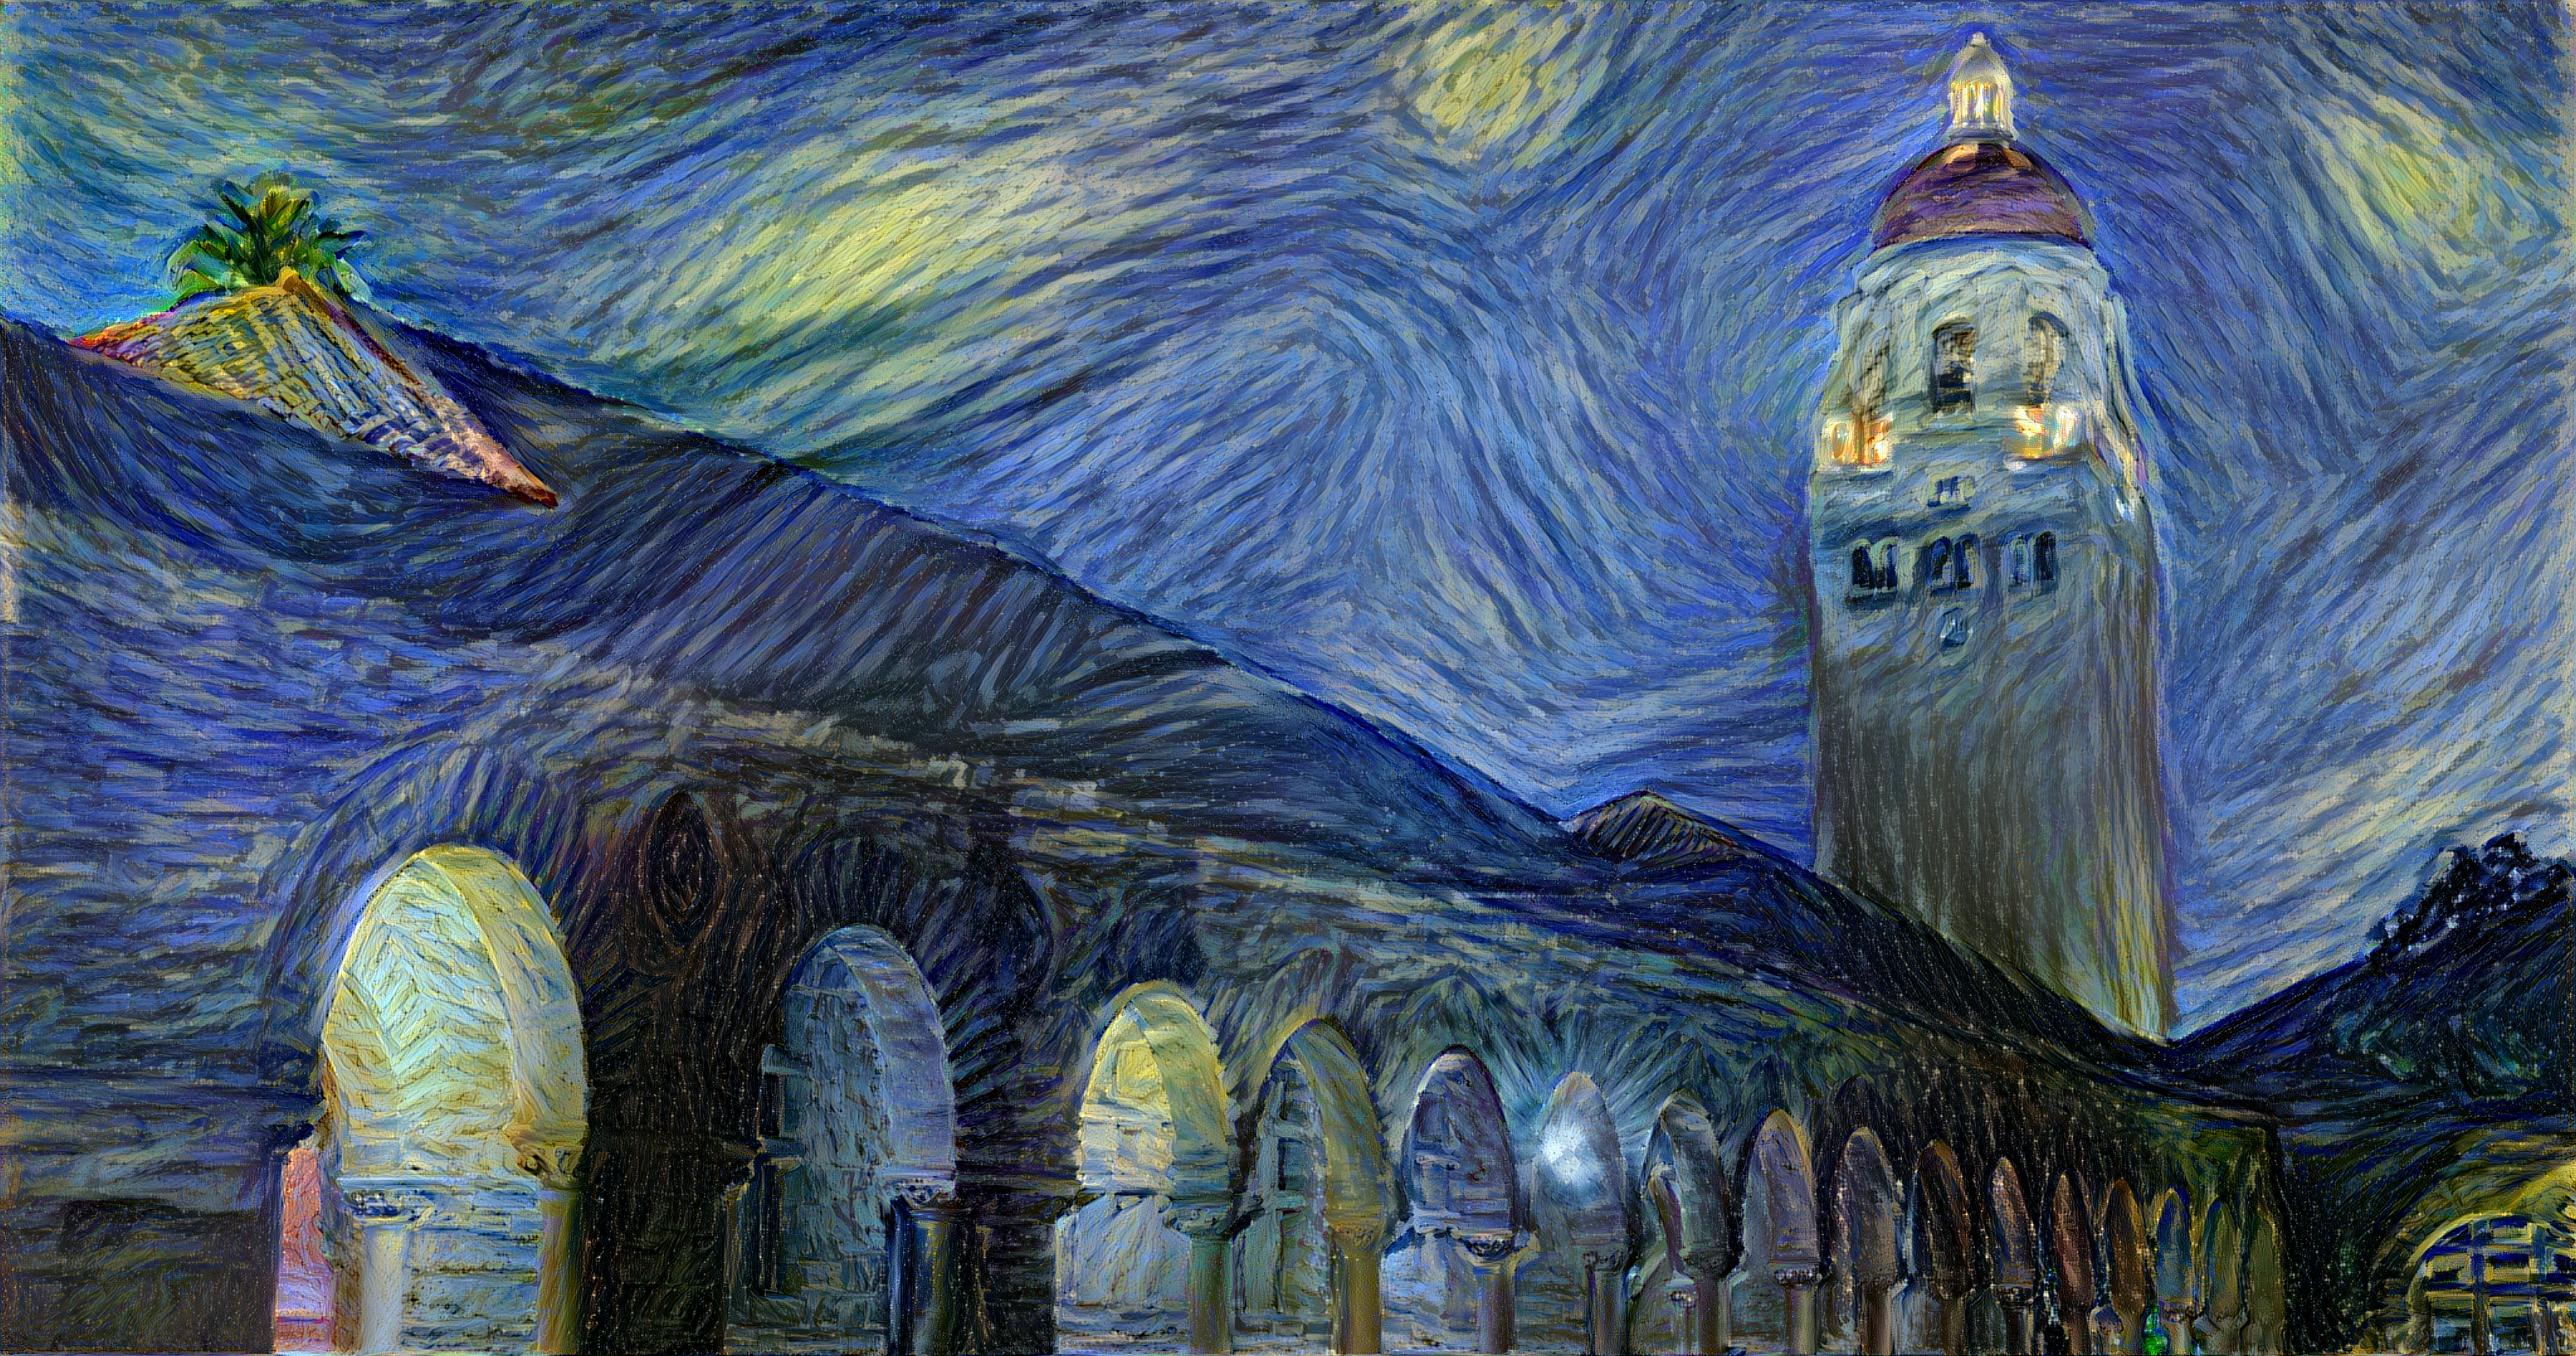 A synthetic image generated by Justin Johnson that depicts Stanford University's Hoover Tower using the style of Vincent van Gogh's 'The Starry Night'